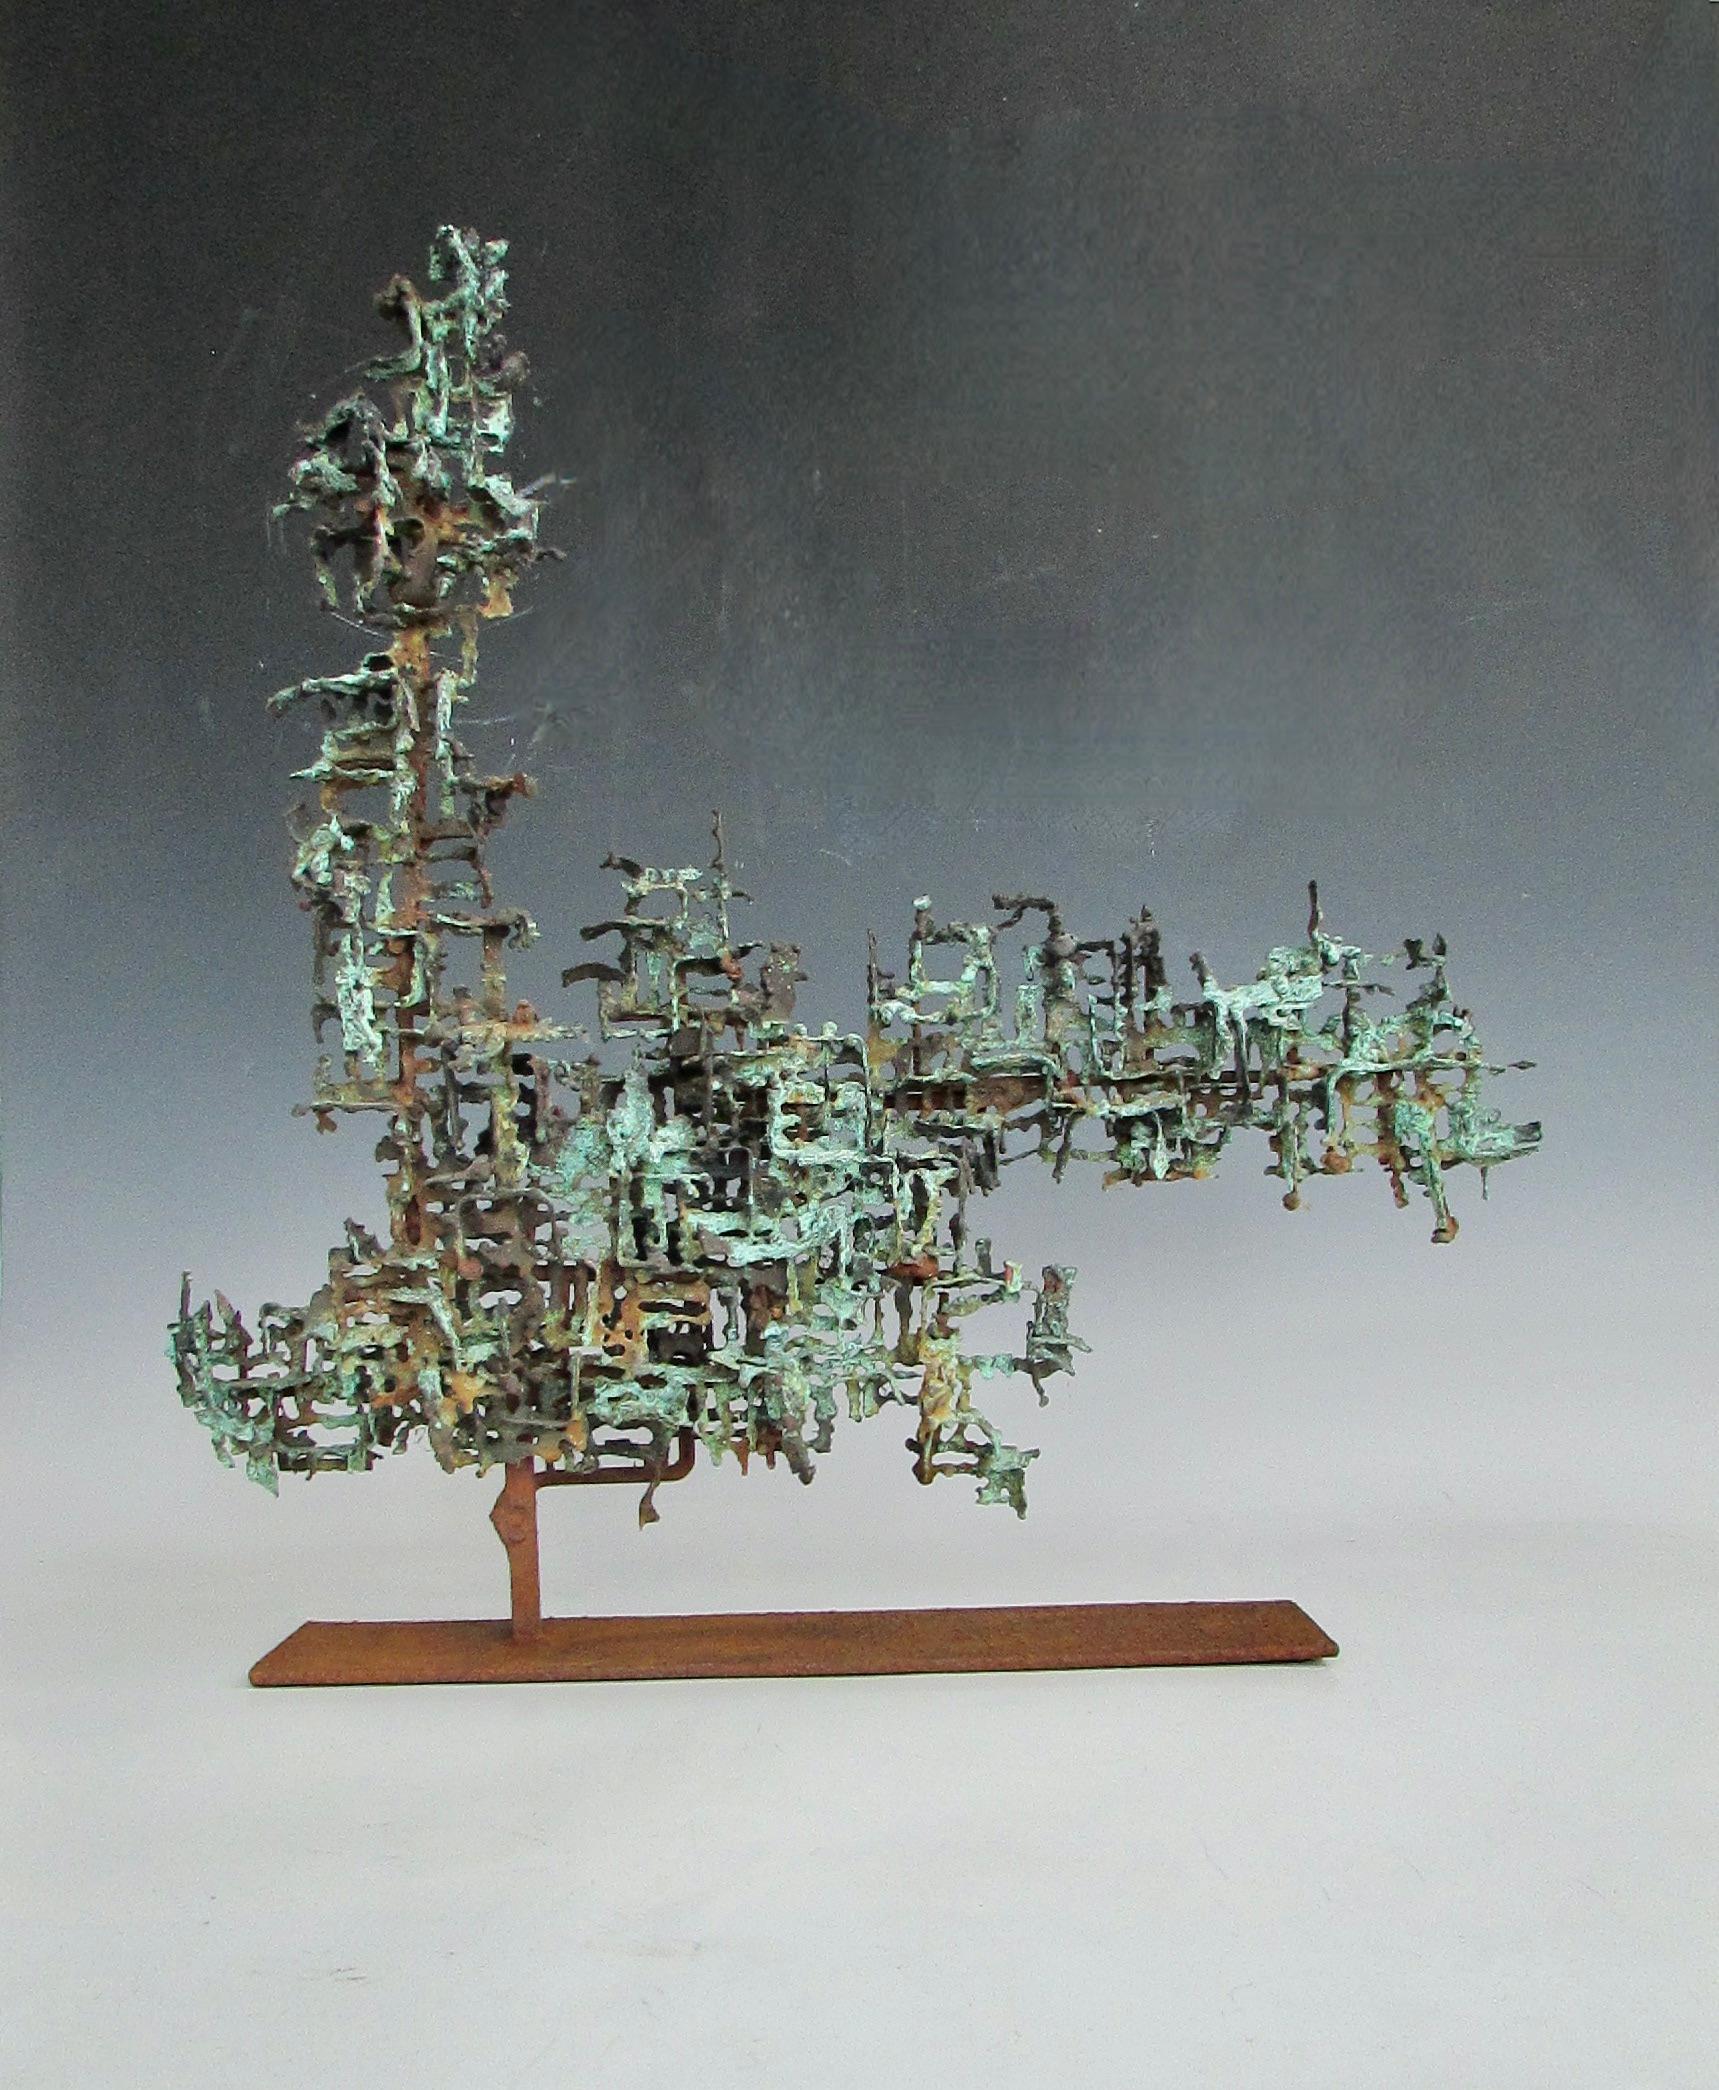 Believed to be an earlier work by Marcello Fantoni (1915-2011) sculptor, ceramicist, metalworker, multi-media artist and designer . A study in patina and corrosion in brutalist  yet modernist style . Patinated copper over welded steel skeleton .